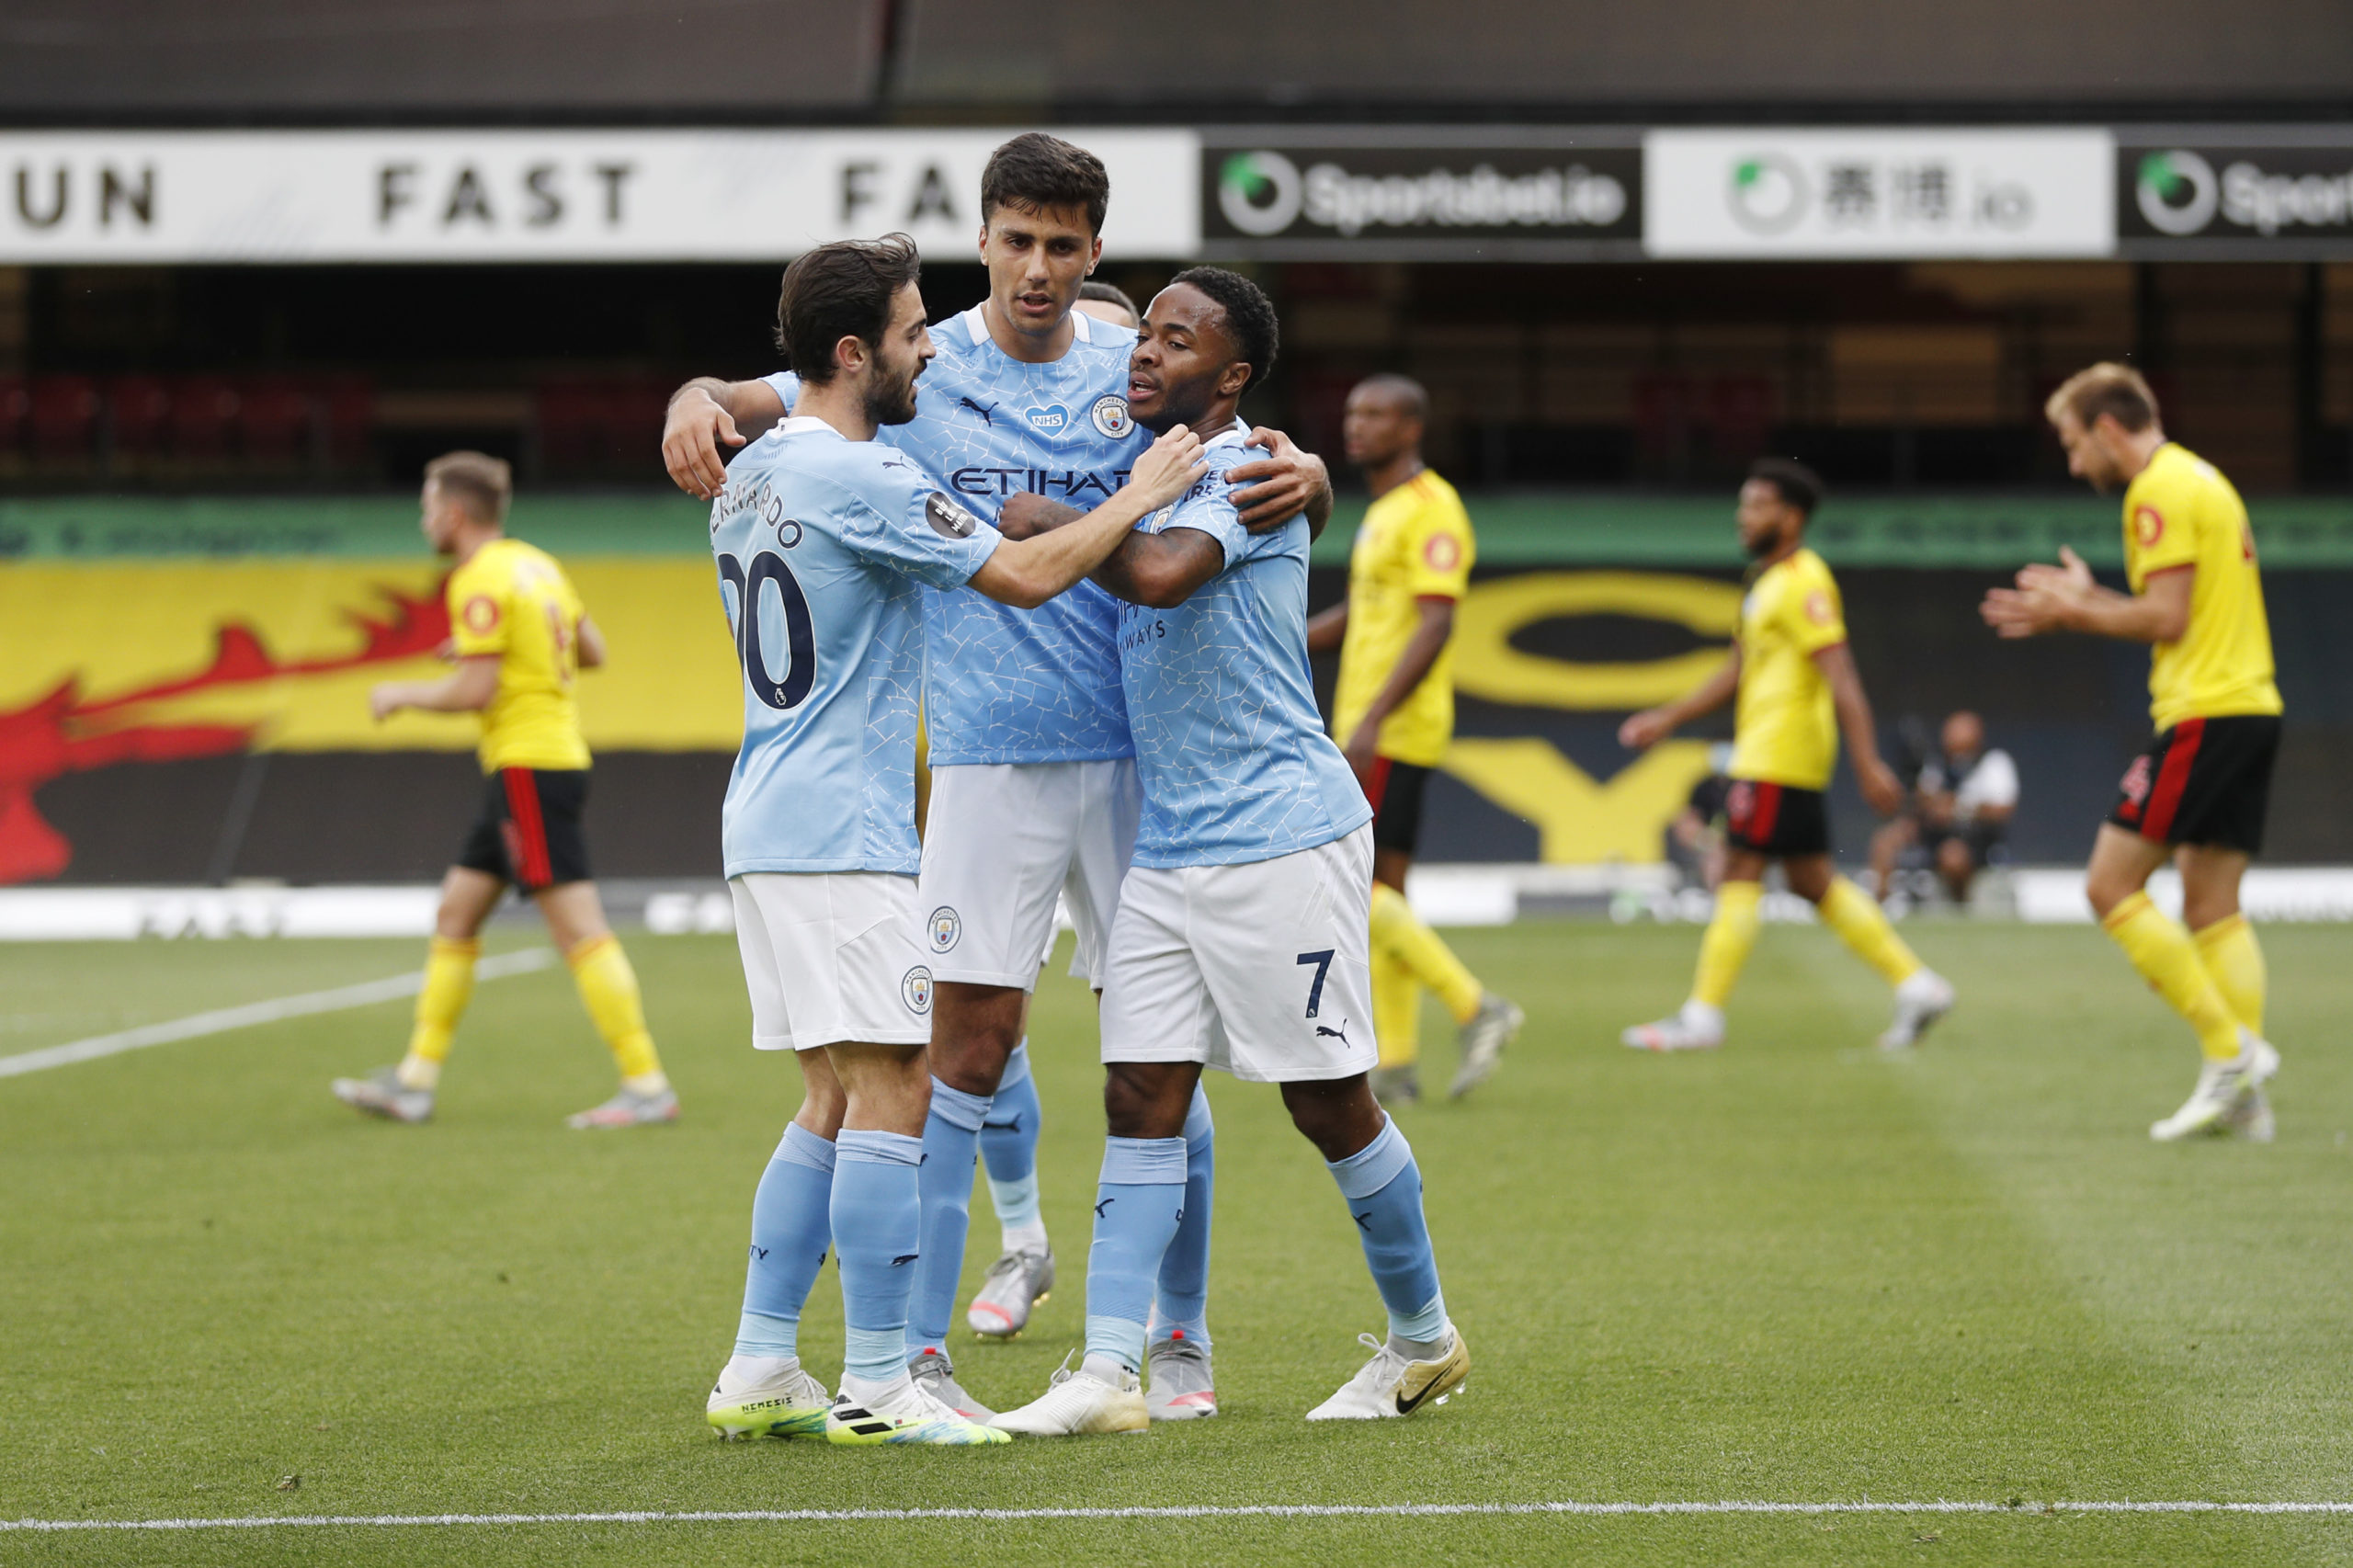 Manchester City vs Watford Live: Manchester City aims to extend their lead at the top of the Premier League table against Watford, Check Team News, Predictions, Live Streaming